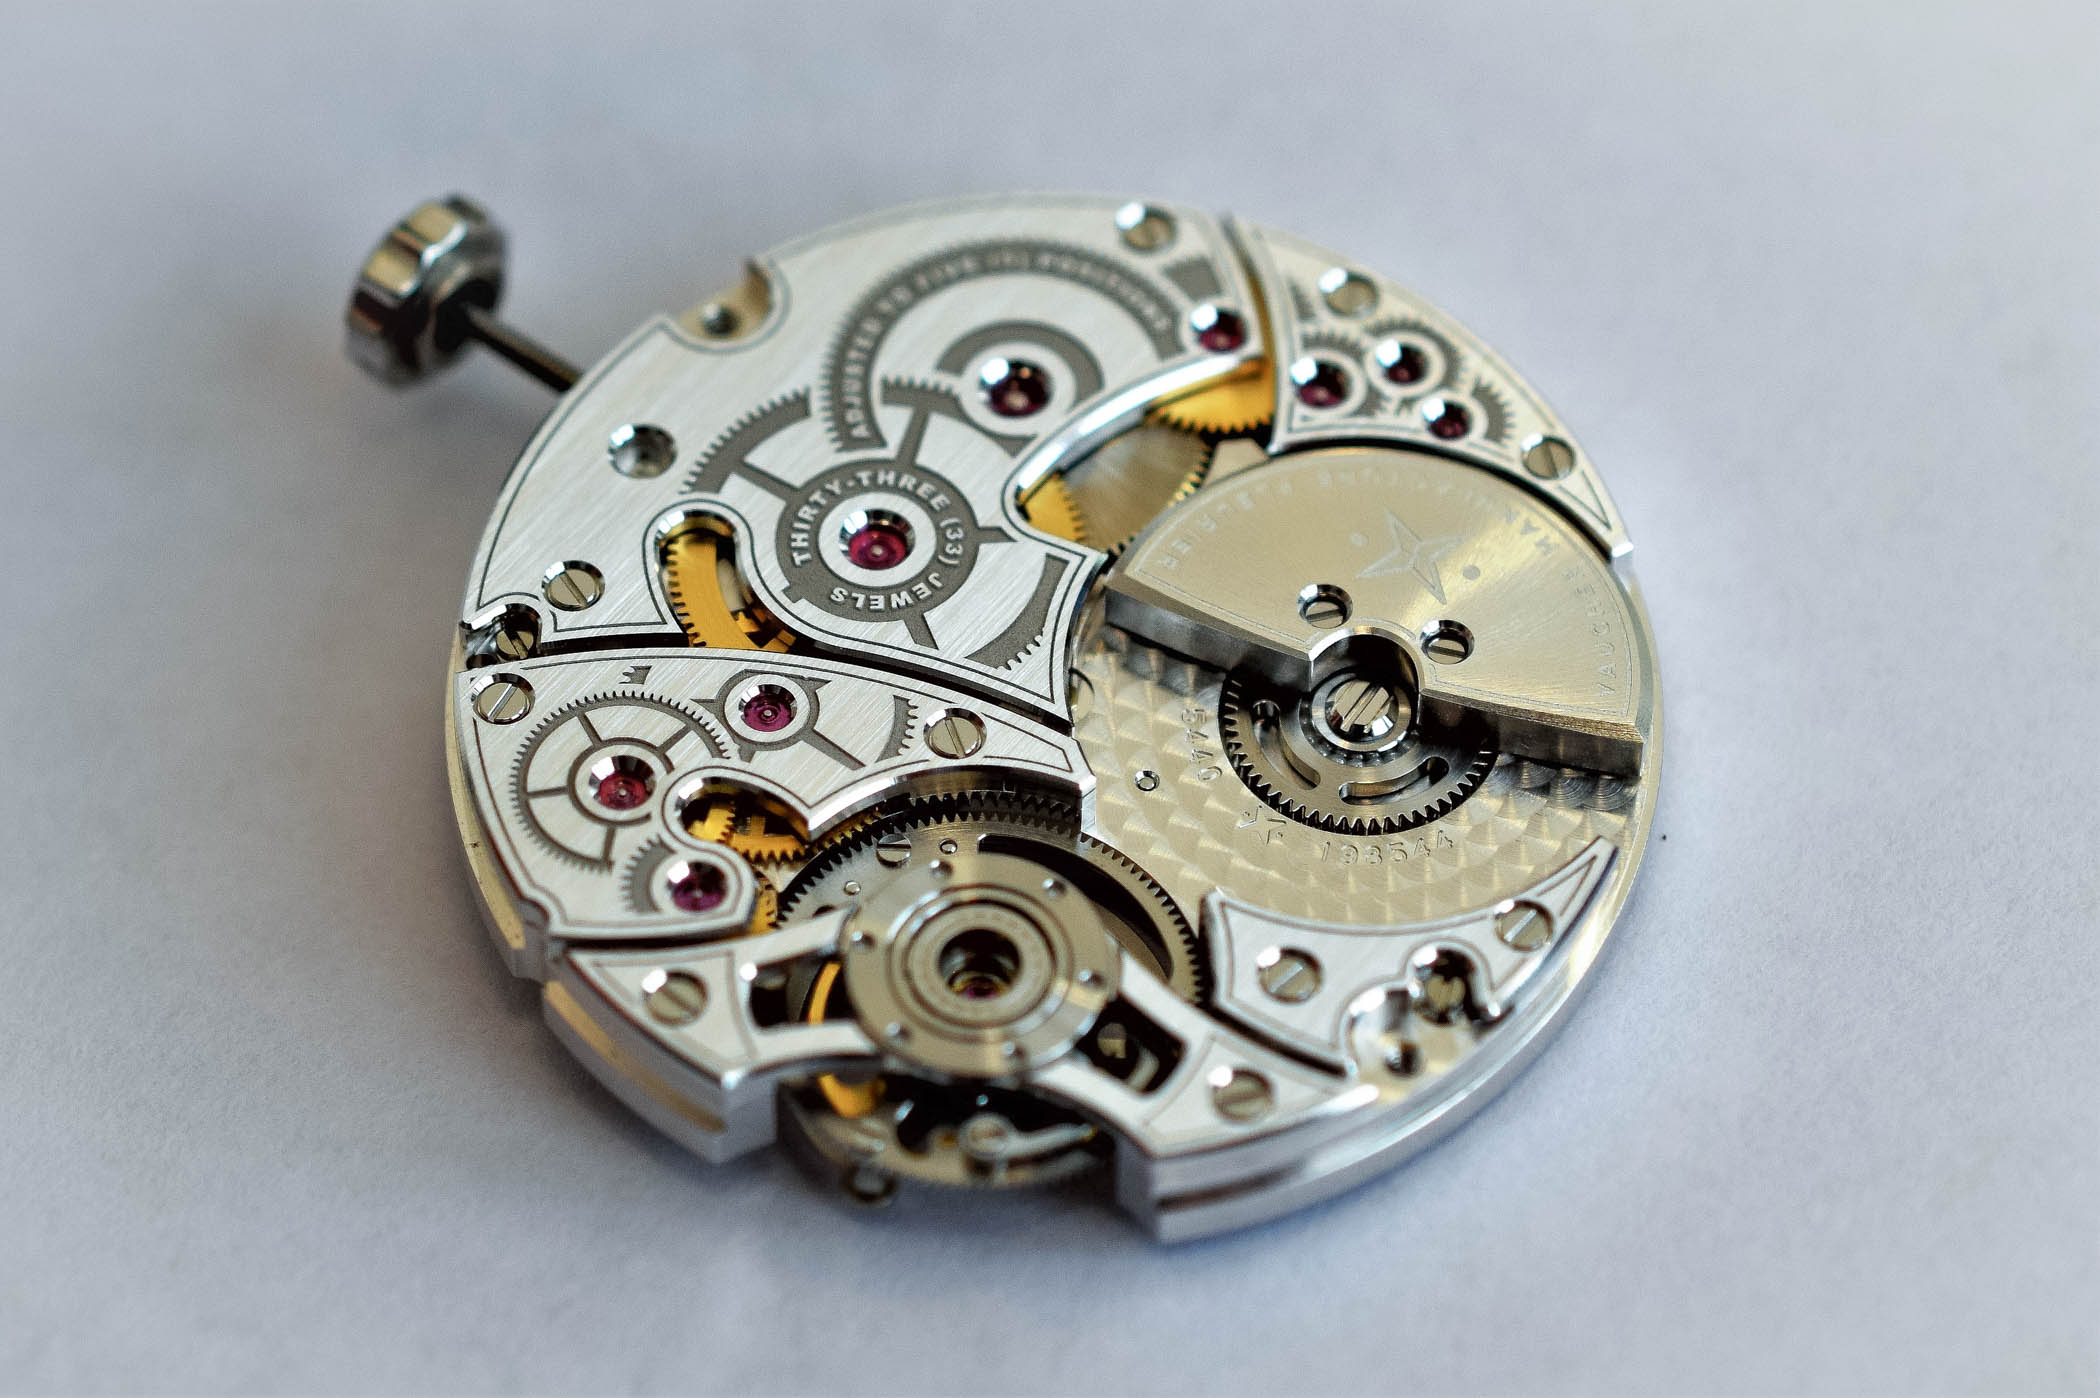 Inside Vaucher Manufacture Fleurier – How Exactly Watch Parts Are  Manufactured?